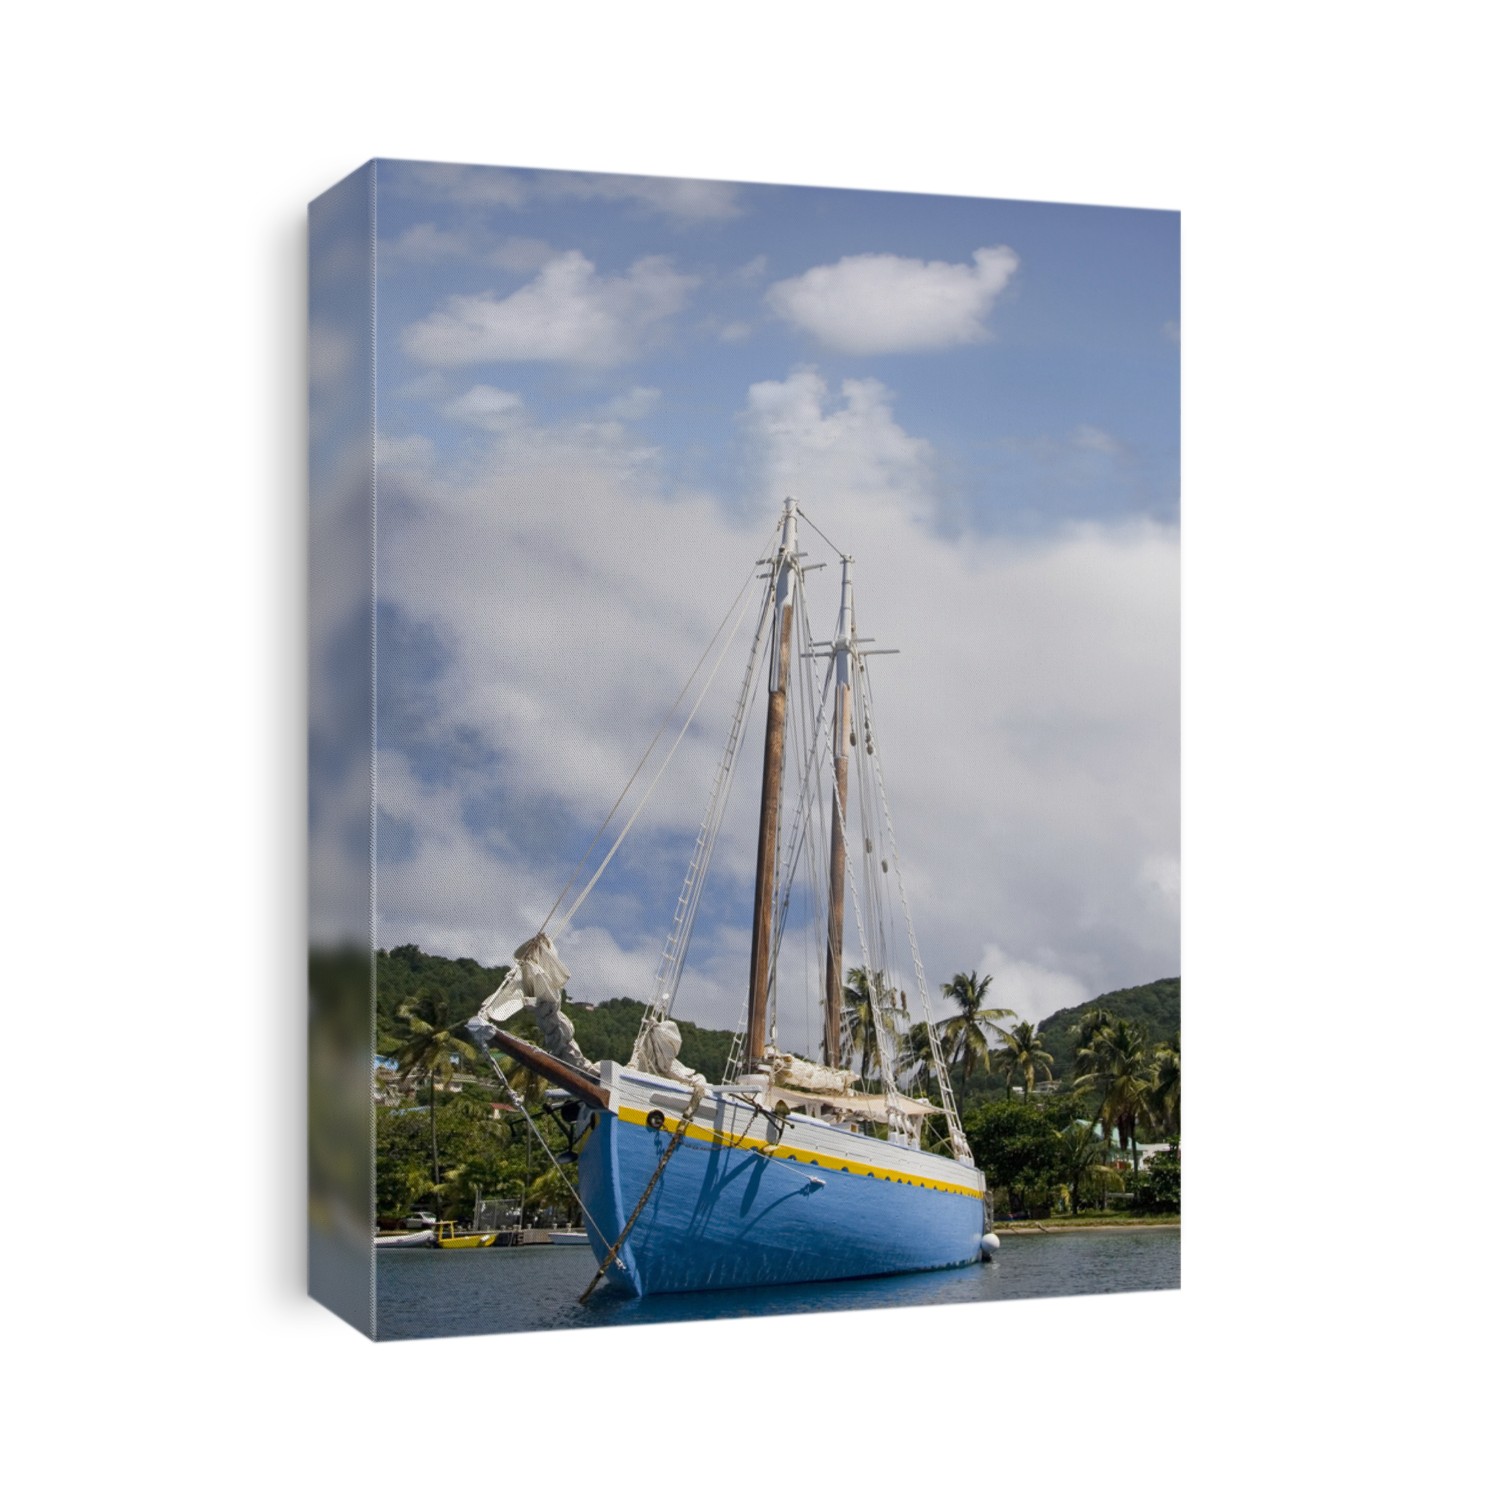 Sailing ship mored in Admiralty Bay on the island of Bequia, St. Vincent and the Grenadines.